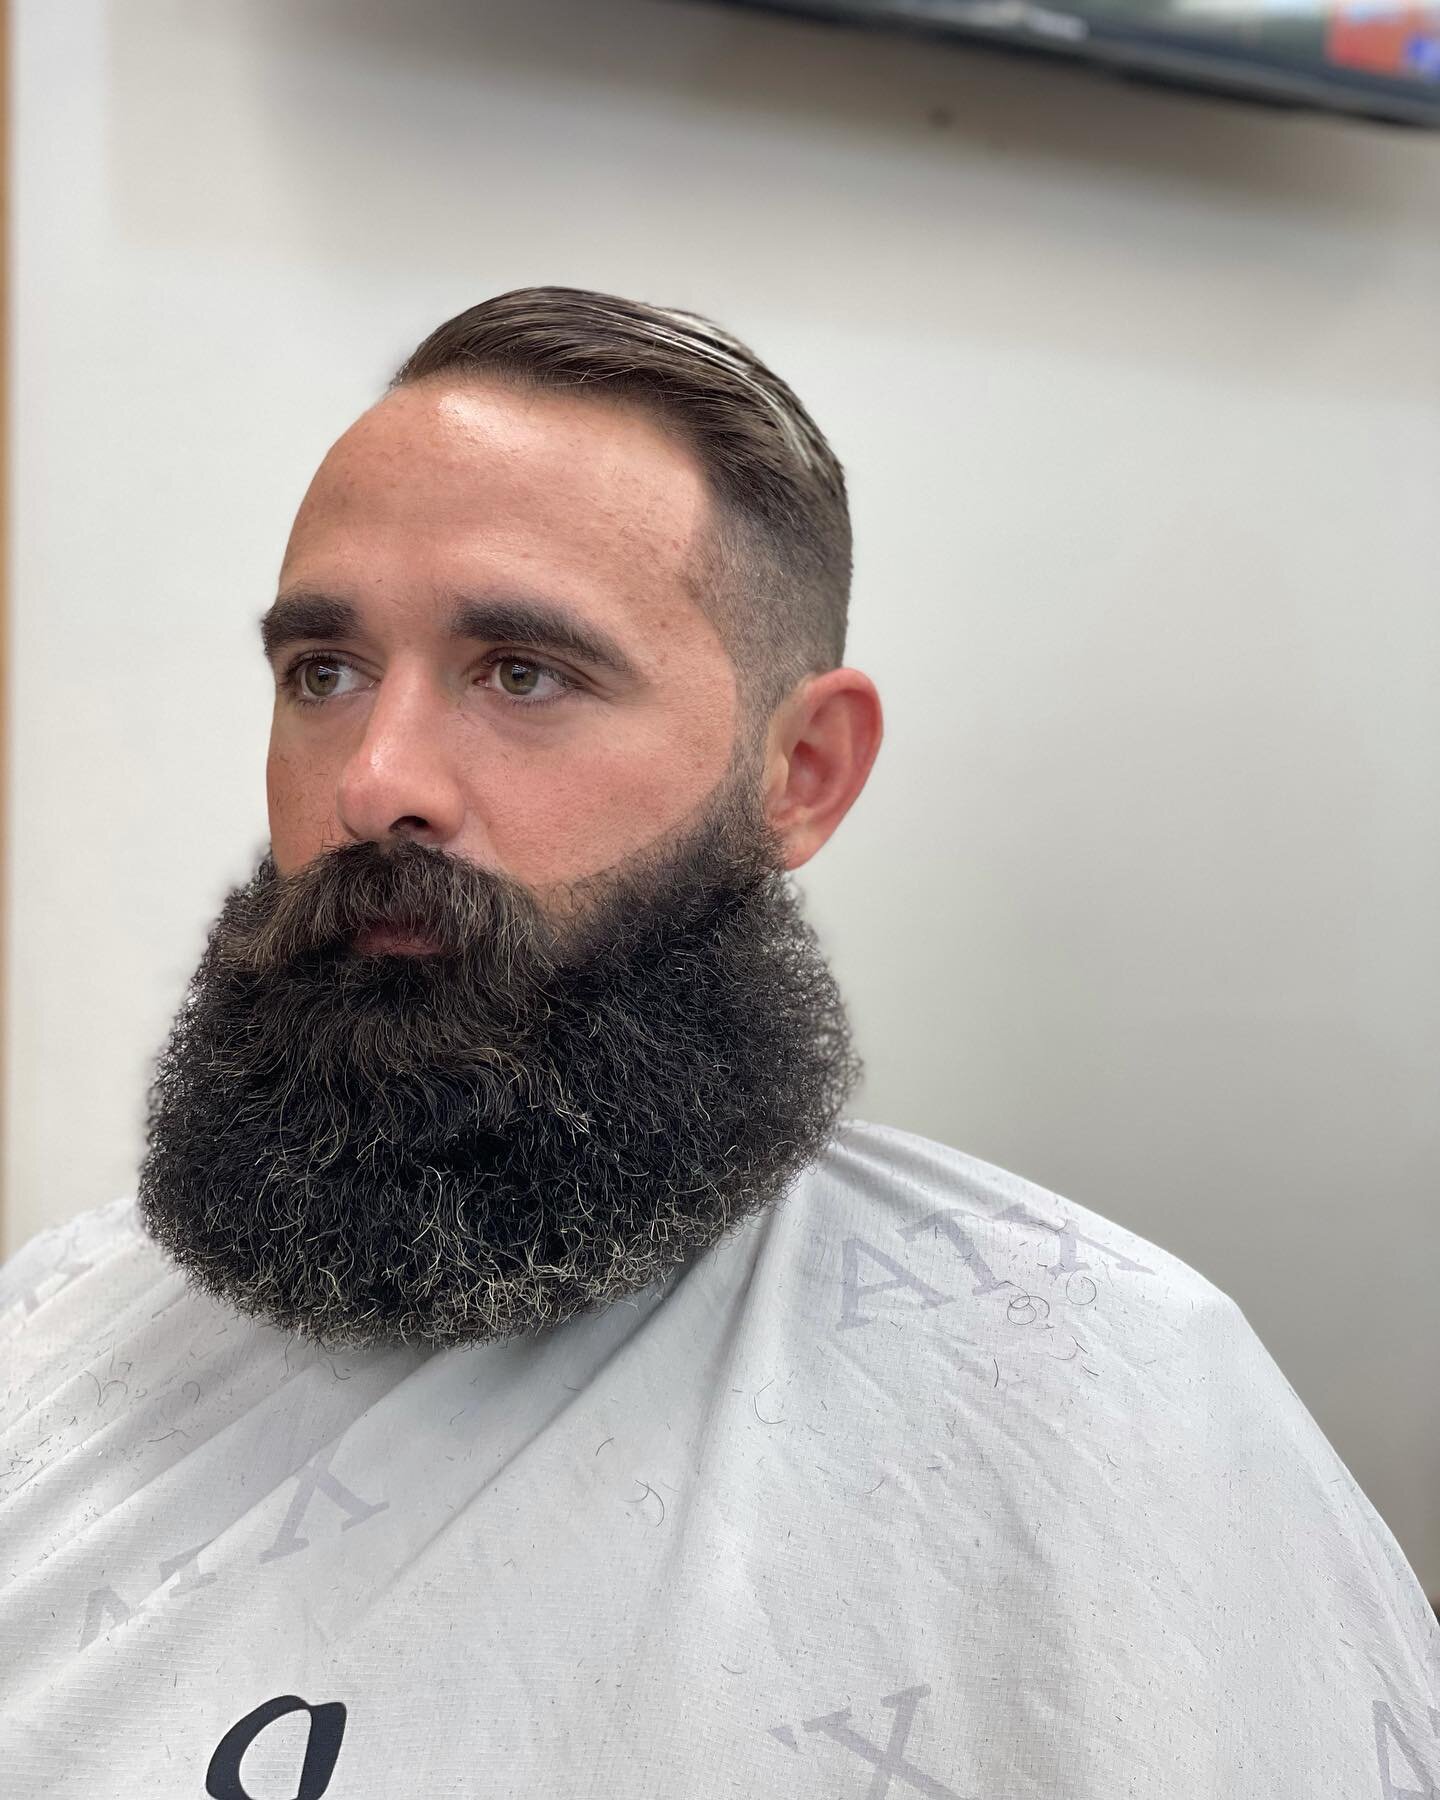 Book now ! Transformation! Swipe ⬅️
&bull;
&bull;
&bull;
#midfade #fadedbeard #wahl #wahlclippers #wahldetailers #astrablades #blendedfades #halfbarberxhalfamazing #haircutdesigns hairstyles #cleancuts #blessedfades #barberlifestyle #southaustinbarbe